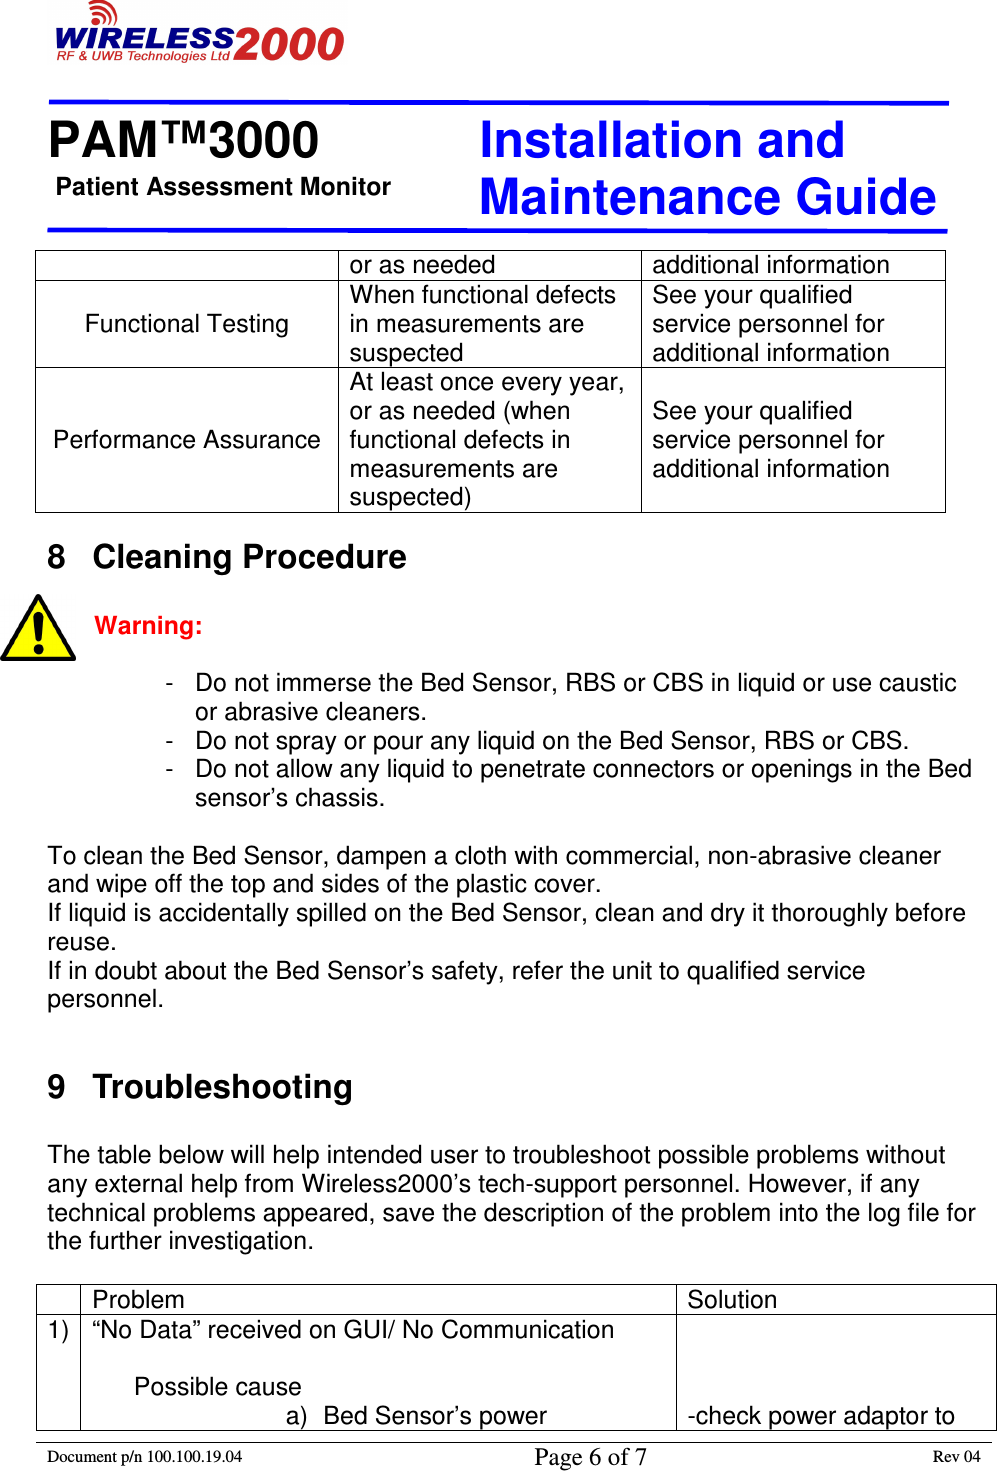 Patient Assessment Monitor                                                                  PAM™3000                       Installation and   Maintenance Guide  Document p/n 100.100.19.04 Page 6 of 7 Rev 04                                                                                                                                         or as needed  additional information Functional Testing When functional defects in measurements are suspected See your qualified service personnel for additional information Performance Assurance At least once every year, or as needed (when functional defects in measurements are suspected) See your qualified service personnel for additional information 8  Cleaning Procedure  Warning:  -  Do not immerse the Bed Sensor, RBS or CBS in liquid or use caustic or abrasive cleaners. -  Do not spray or pour any liquid on the Bed Sensor, RBS or CBS. -  Do not allow any liquid to penetrate connectors or openings in the Bed sensor’s chassis.  To clean the Bed Sensor, dampen a cloth with commercial, non-abrasive cleaner and wipe off the top and sides of the plastic cover. If liquid is accidentally spilled on the Bed Sensor, clean and dry it thoroughly before reuse. If in doubt about the Bed Sensor’s safety, refer the unit to qualified service personnel.  9  Troubleshooting  The table below will help intended user to troubleshoot possible problems without any external help from Wireless2000’s tech-support personnel. However, if any technical problems appeared, save the description of the problem into the log file for the further investigation.    Problem  Solution 1) “No Data” received on GUI/ No Communication        Possible cause  a)  Bed Sensor’s power    -check power adaptor to 